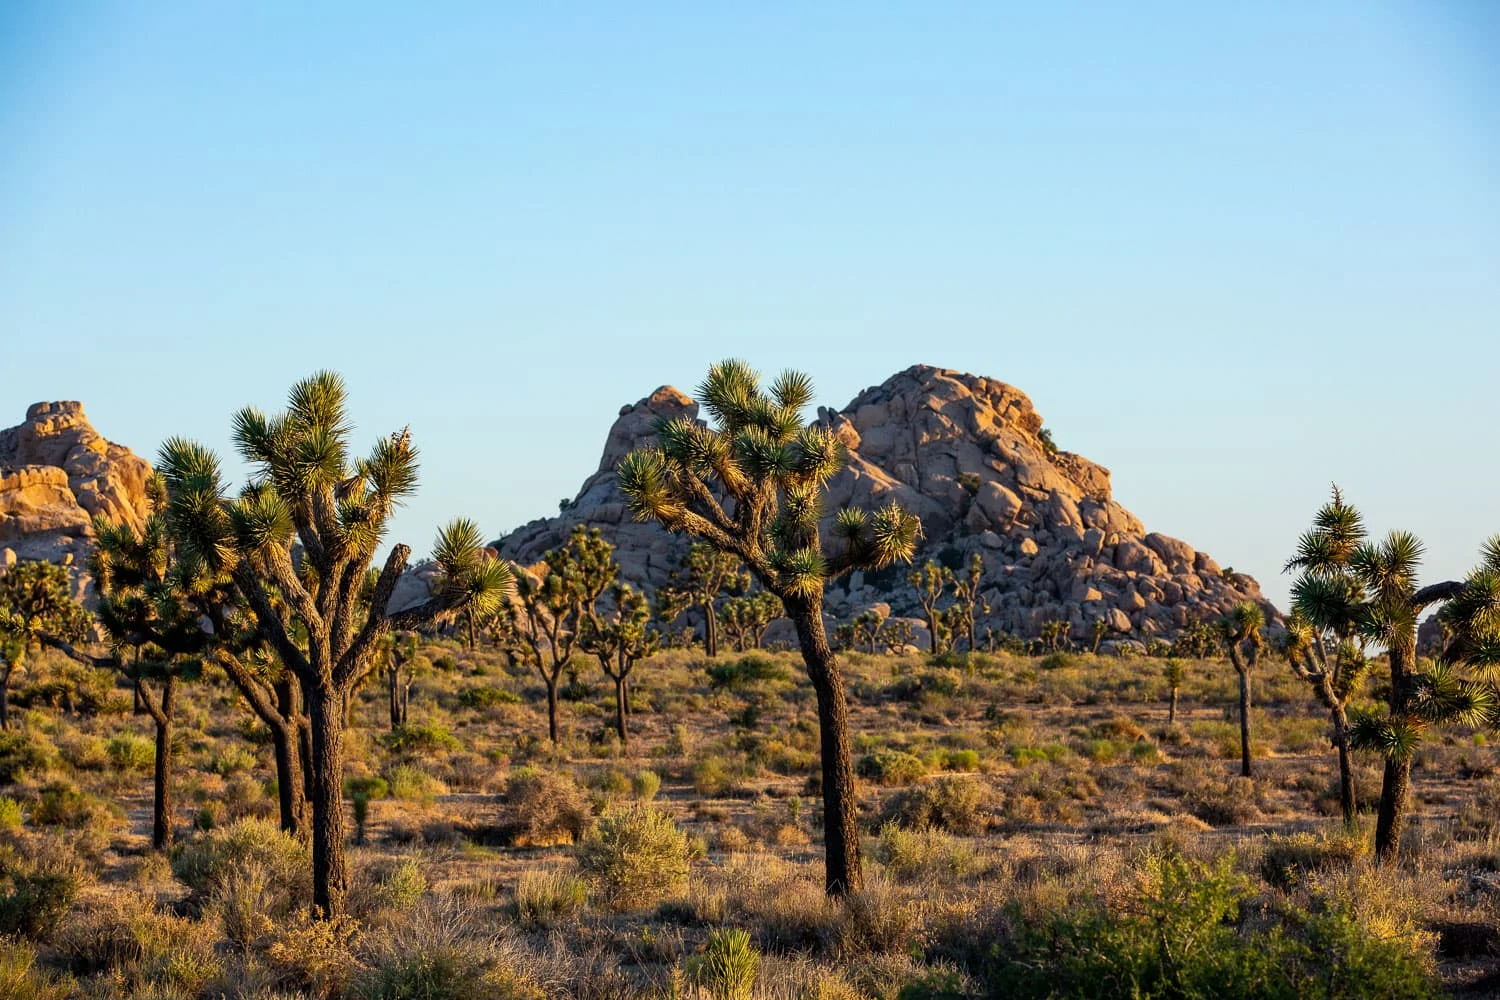 Lost Horse picnic area at Joshua Tree National Park is one of 11 approved ceremony locations within the park.